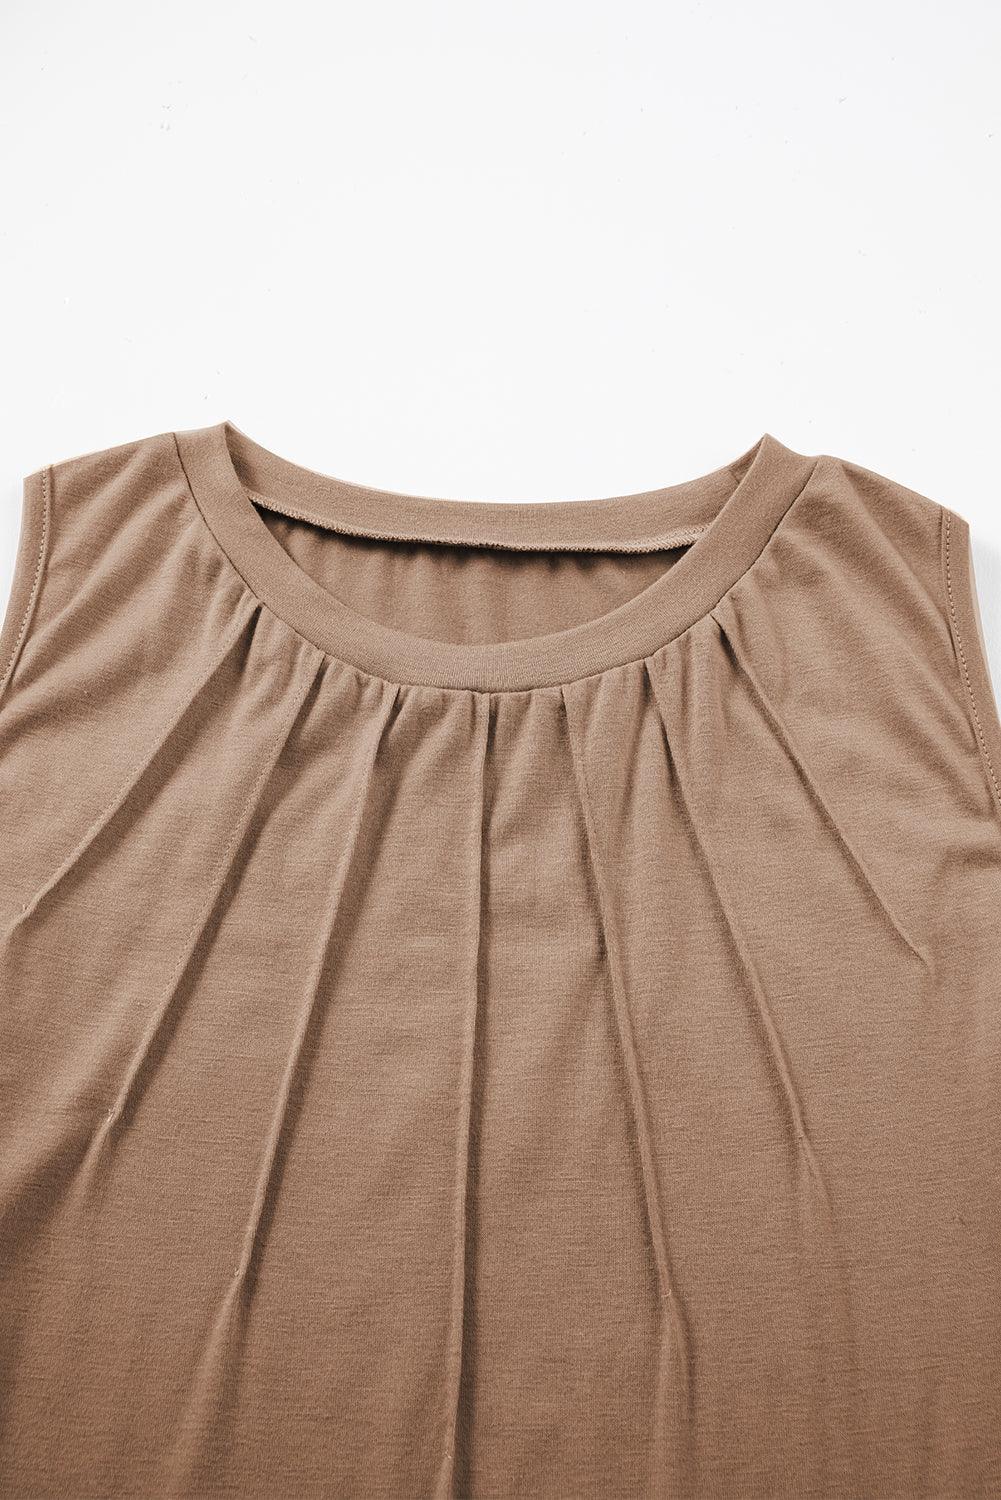 Light French Beige Pleated Detail Round Neck Tank Top - L & M Kee, LLC